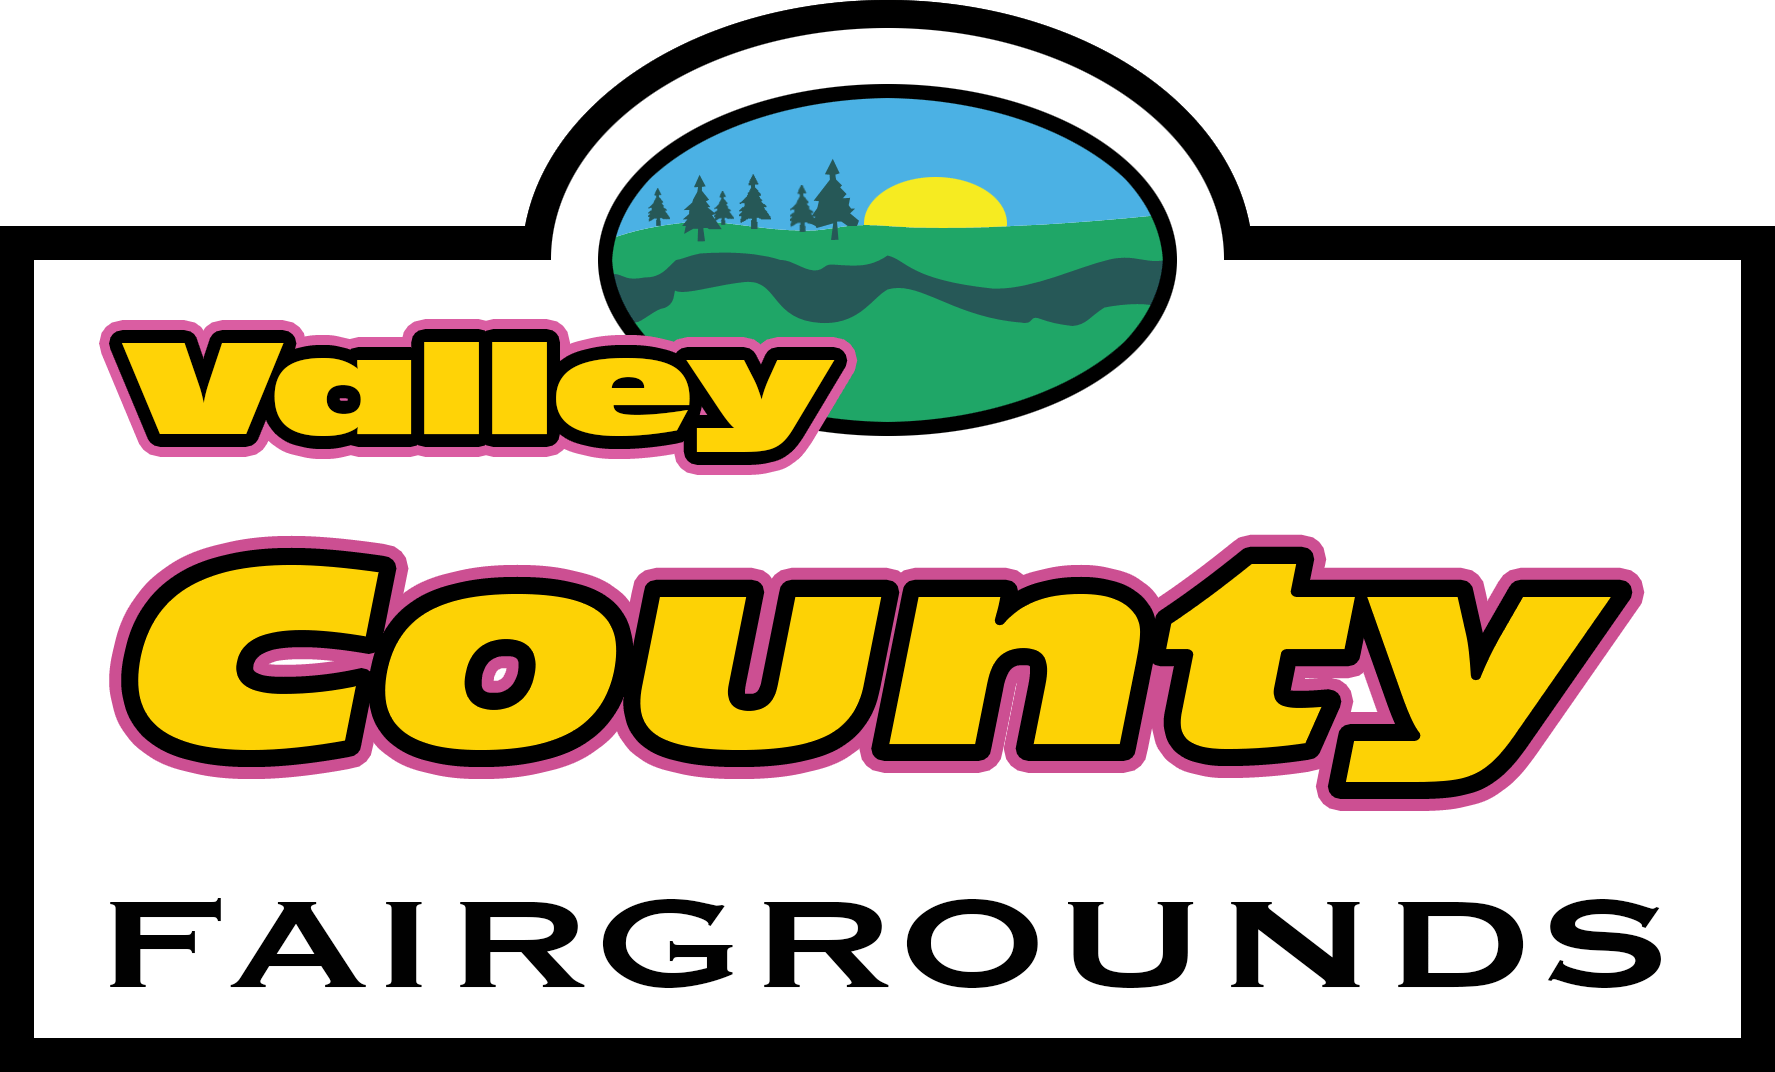 Valley County Fairgrounds - Valley County Fairgrounds (1775x1072)